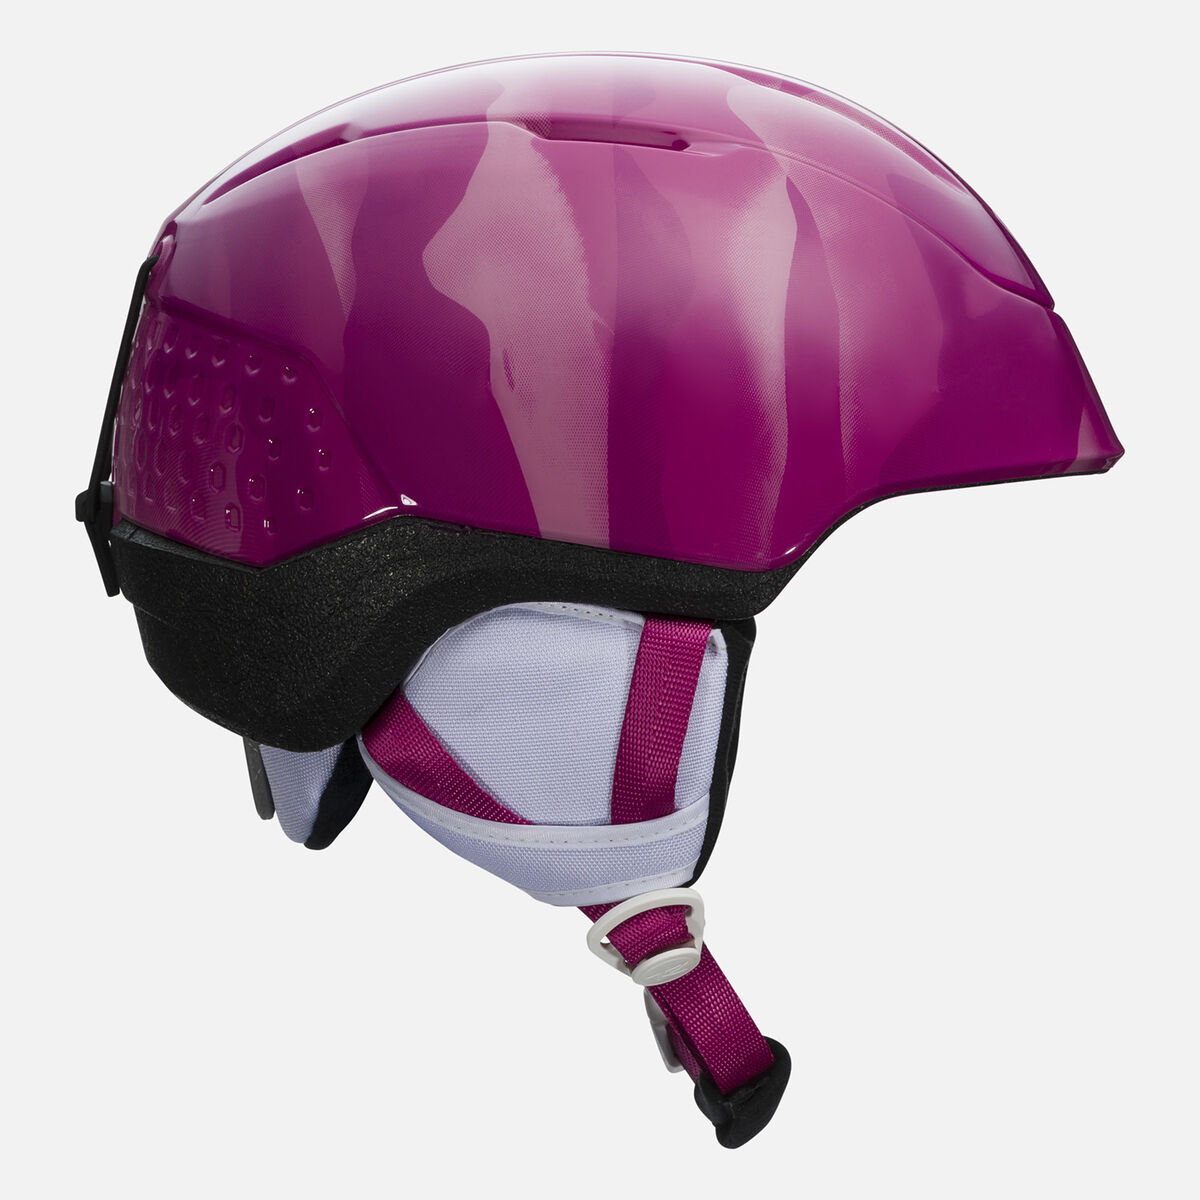 Rossignol WHOOPEE IMPACTS PINK Pink/Purple